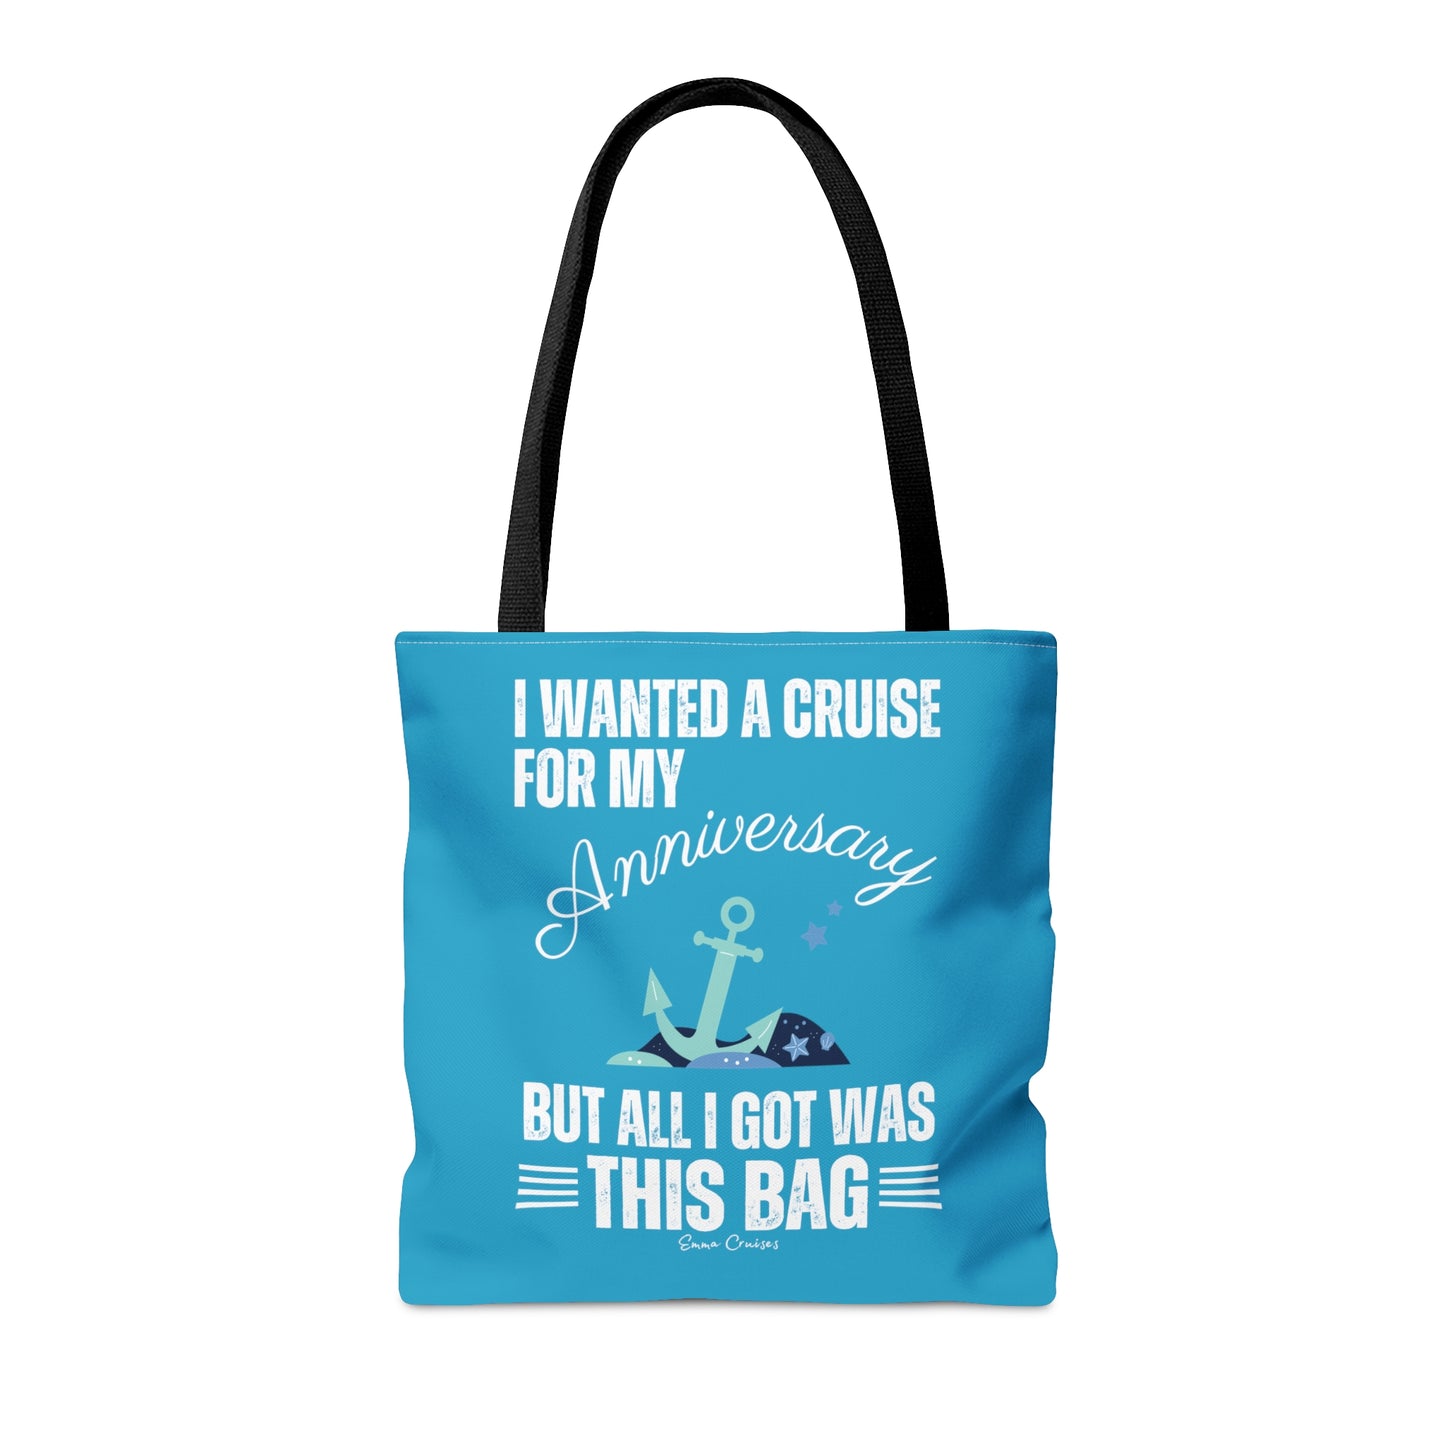 I Wanted a Cruise for My Anniversary - Bag